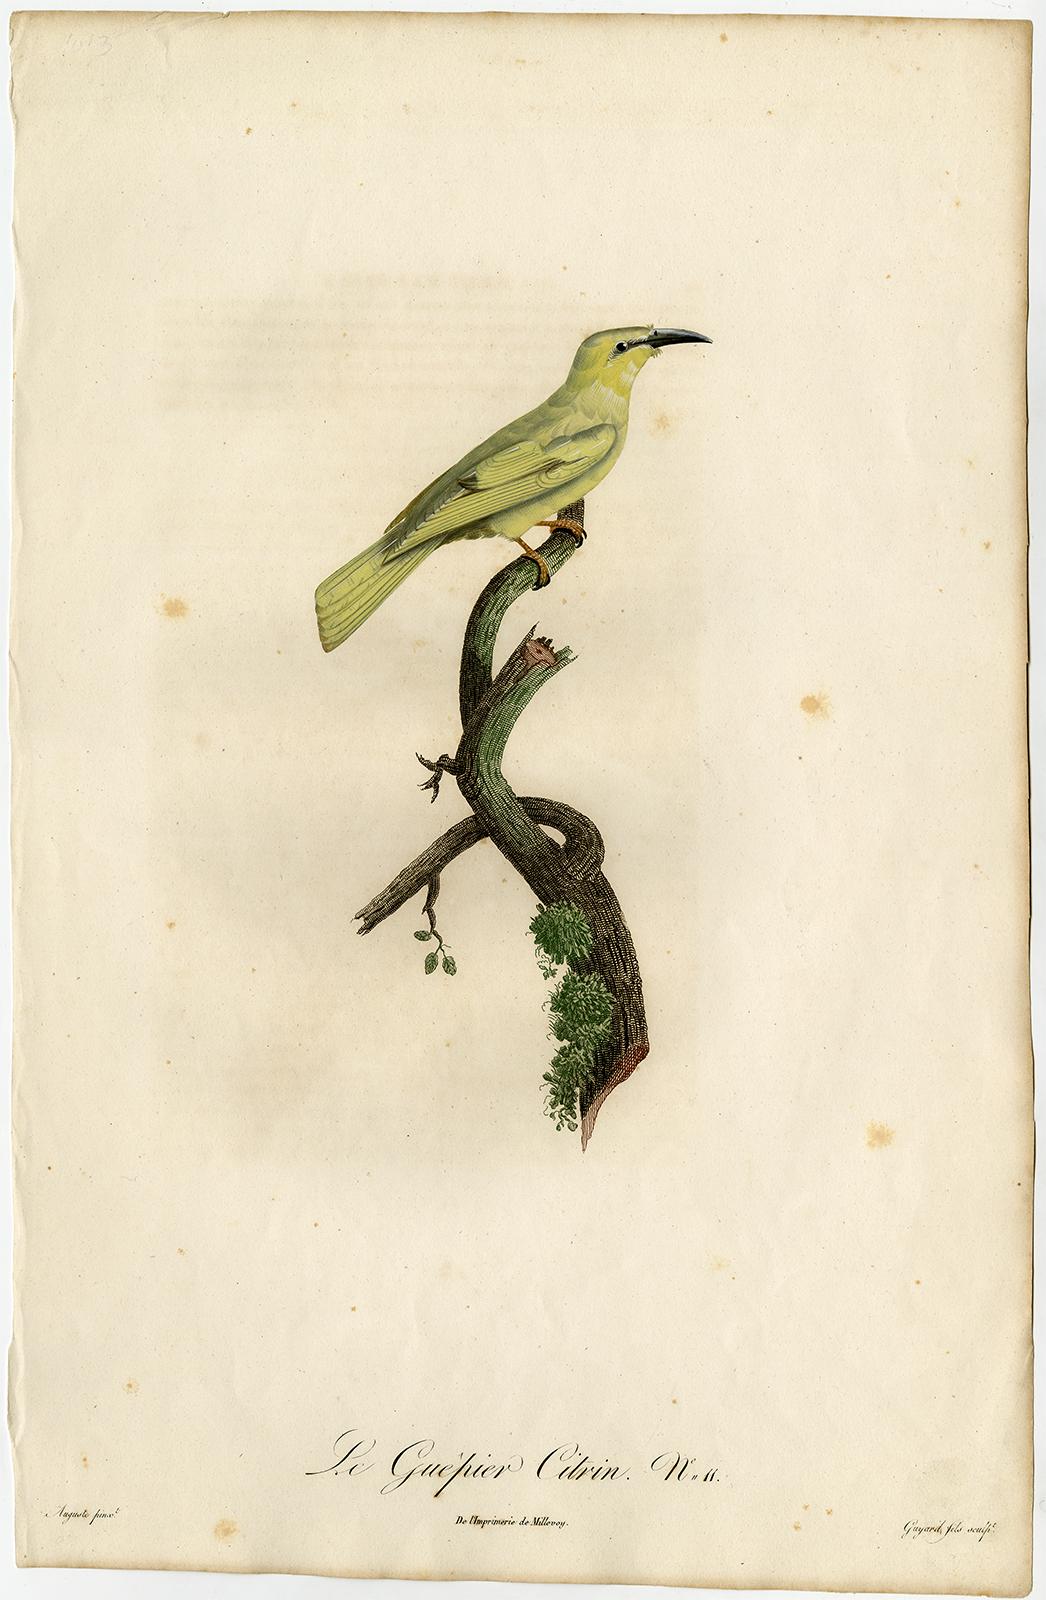 Jacques Barraband Animal Print - The citrine wagtail songbird by Barraband - Hand coloured etching - 19th century